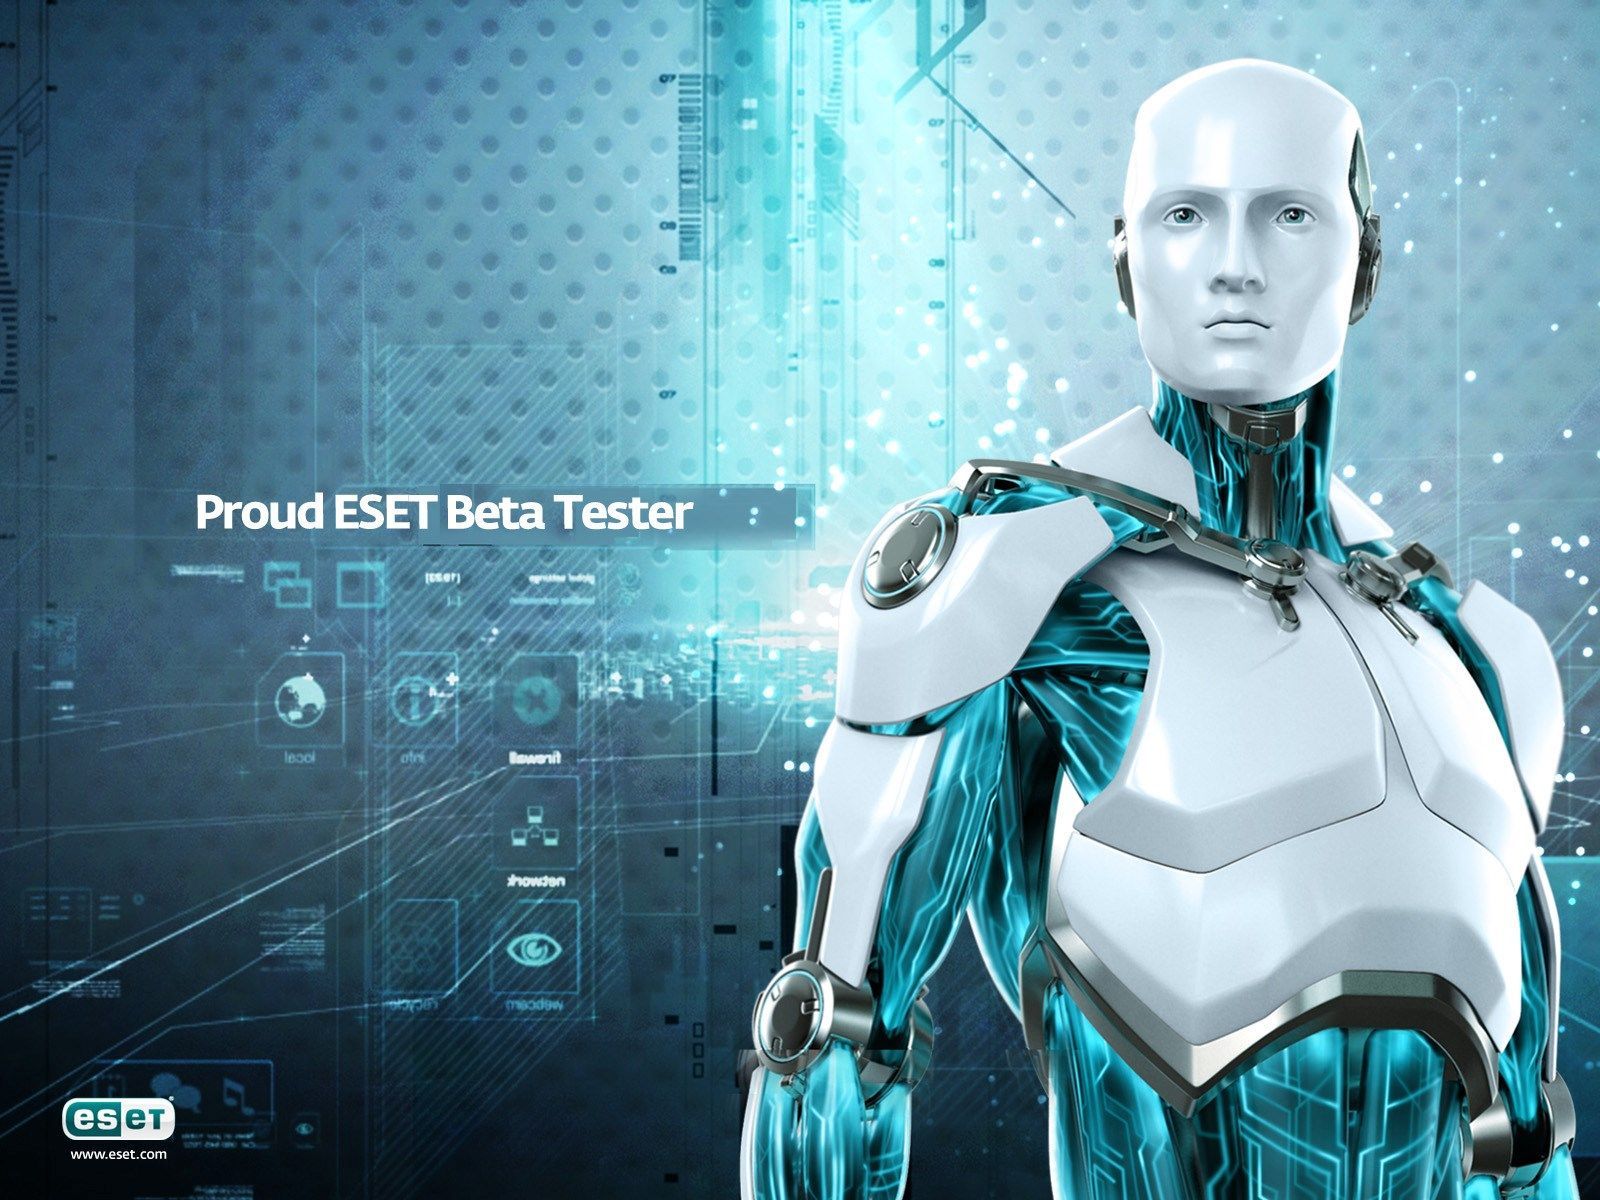 eset nod32 wallpaper HD. Cyber security, Internet security, Hacking computer